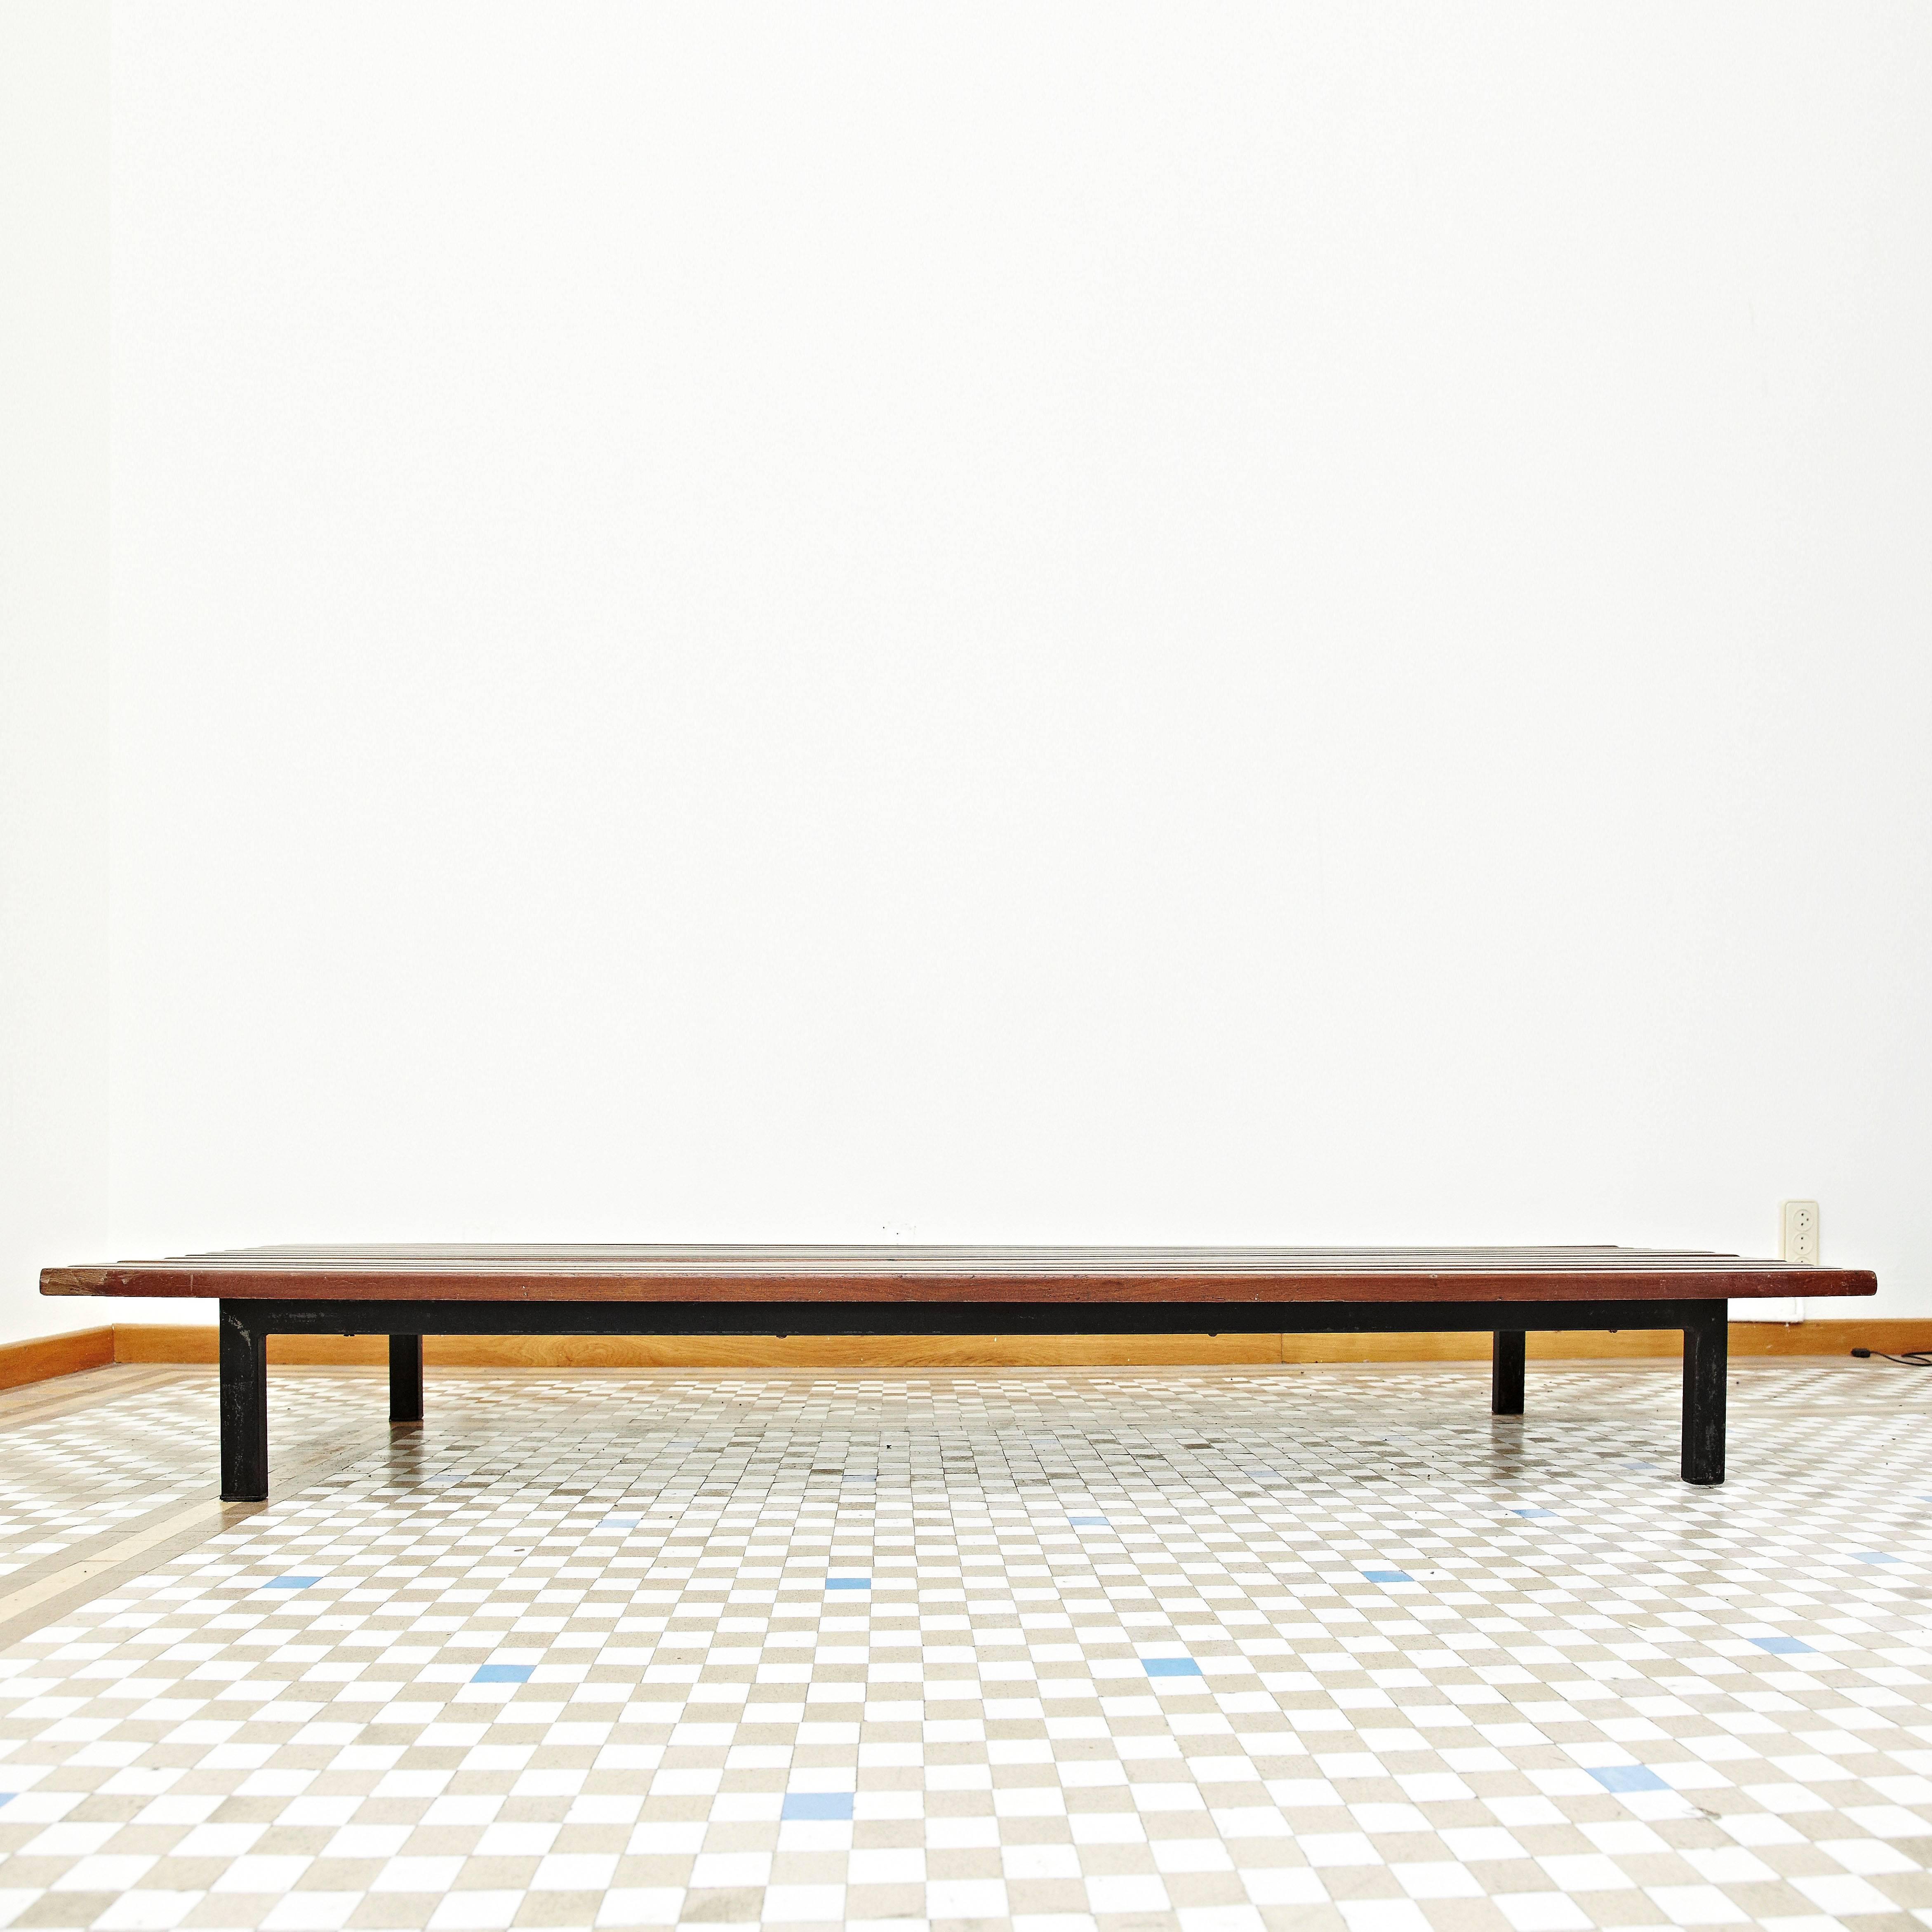 Bench designed by Charlotte Perriand, circa 1950.
Mahogany wood, metal frame legs.

Provenance: Cansado, Mauritania (Africa).

In good original condition, with minor wear consistent with age and use, preserving a beautiful patina. 

Charlotte